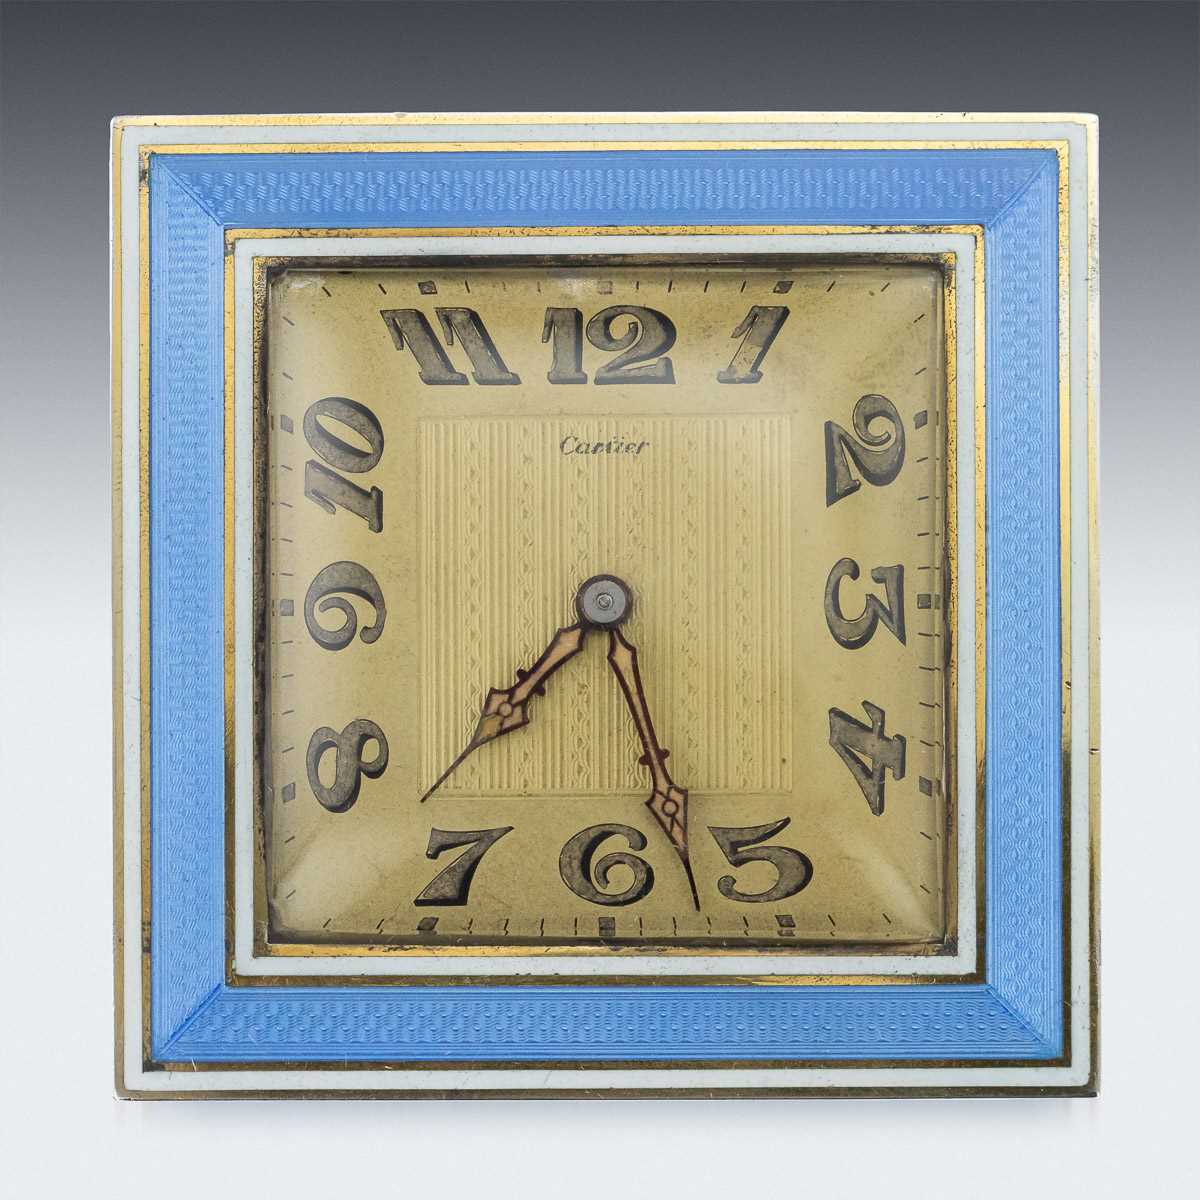 CARTIER: A 1940'S SILVER PLATED AND ENAMELLED DESK CLOCK - Image 2 of 11